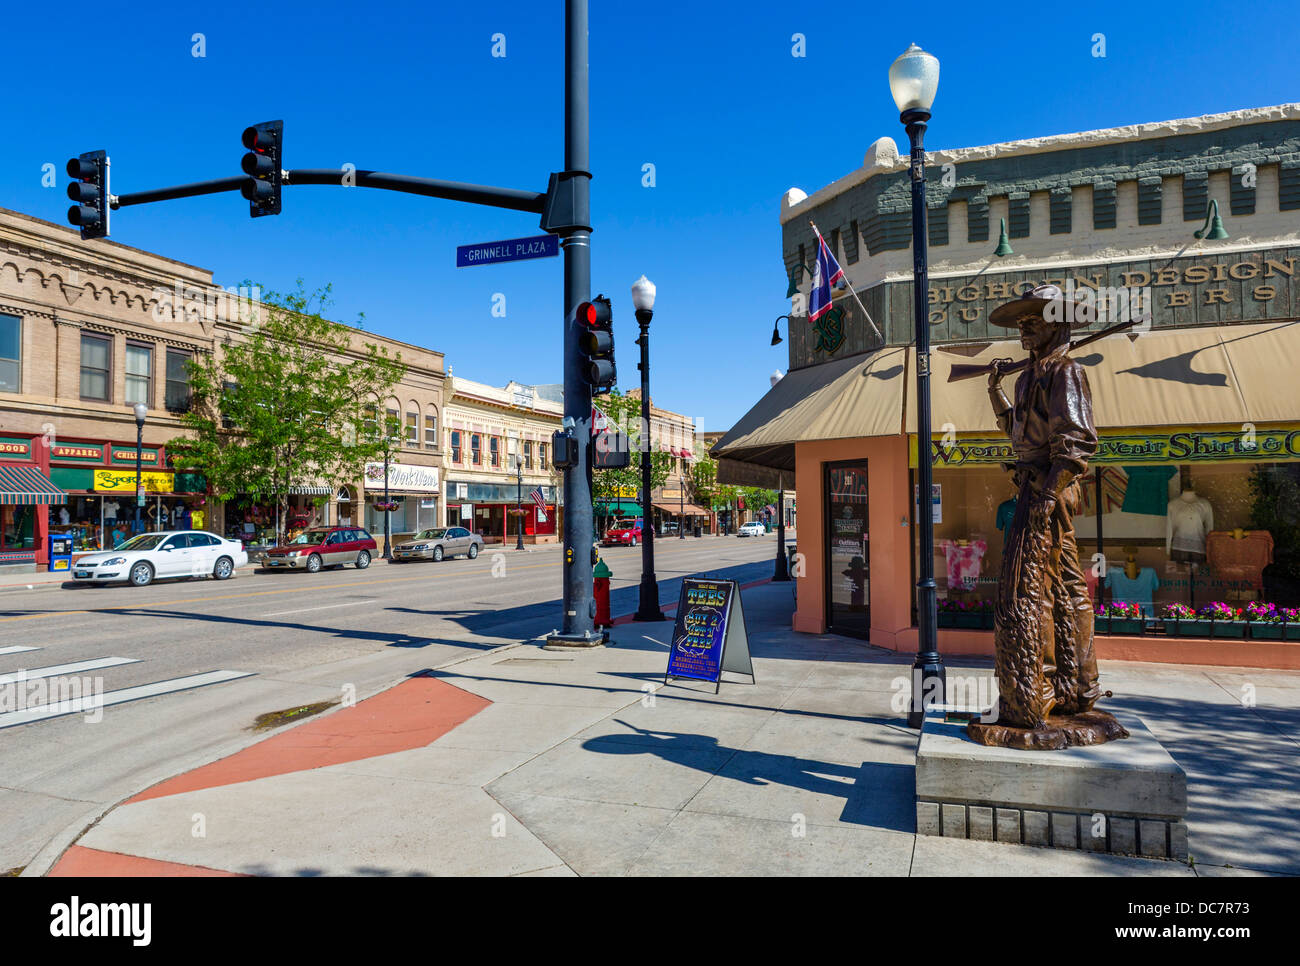 Main Street and Grinnell Plaza in historic downtown Sheridan, Wyoming, USA Stock Photo